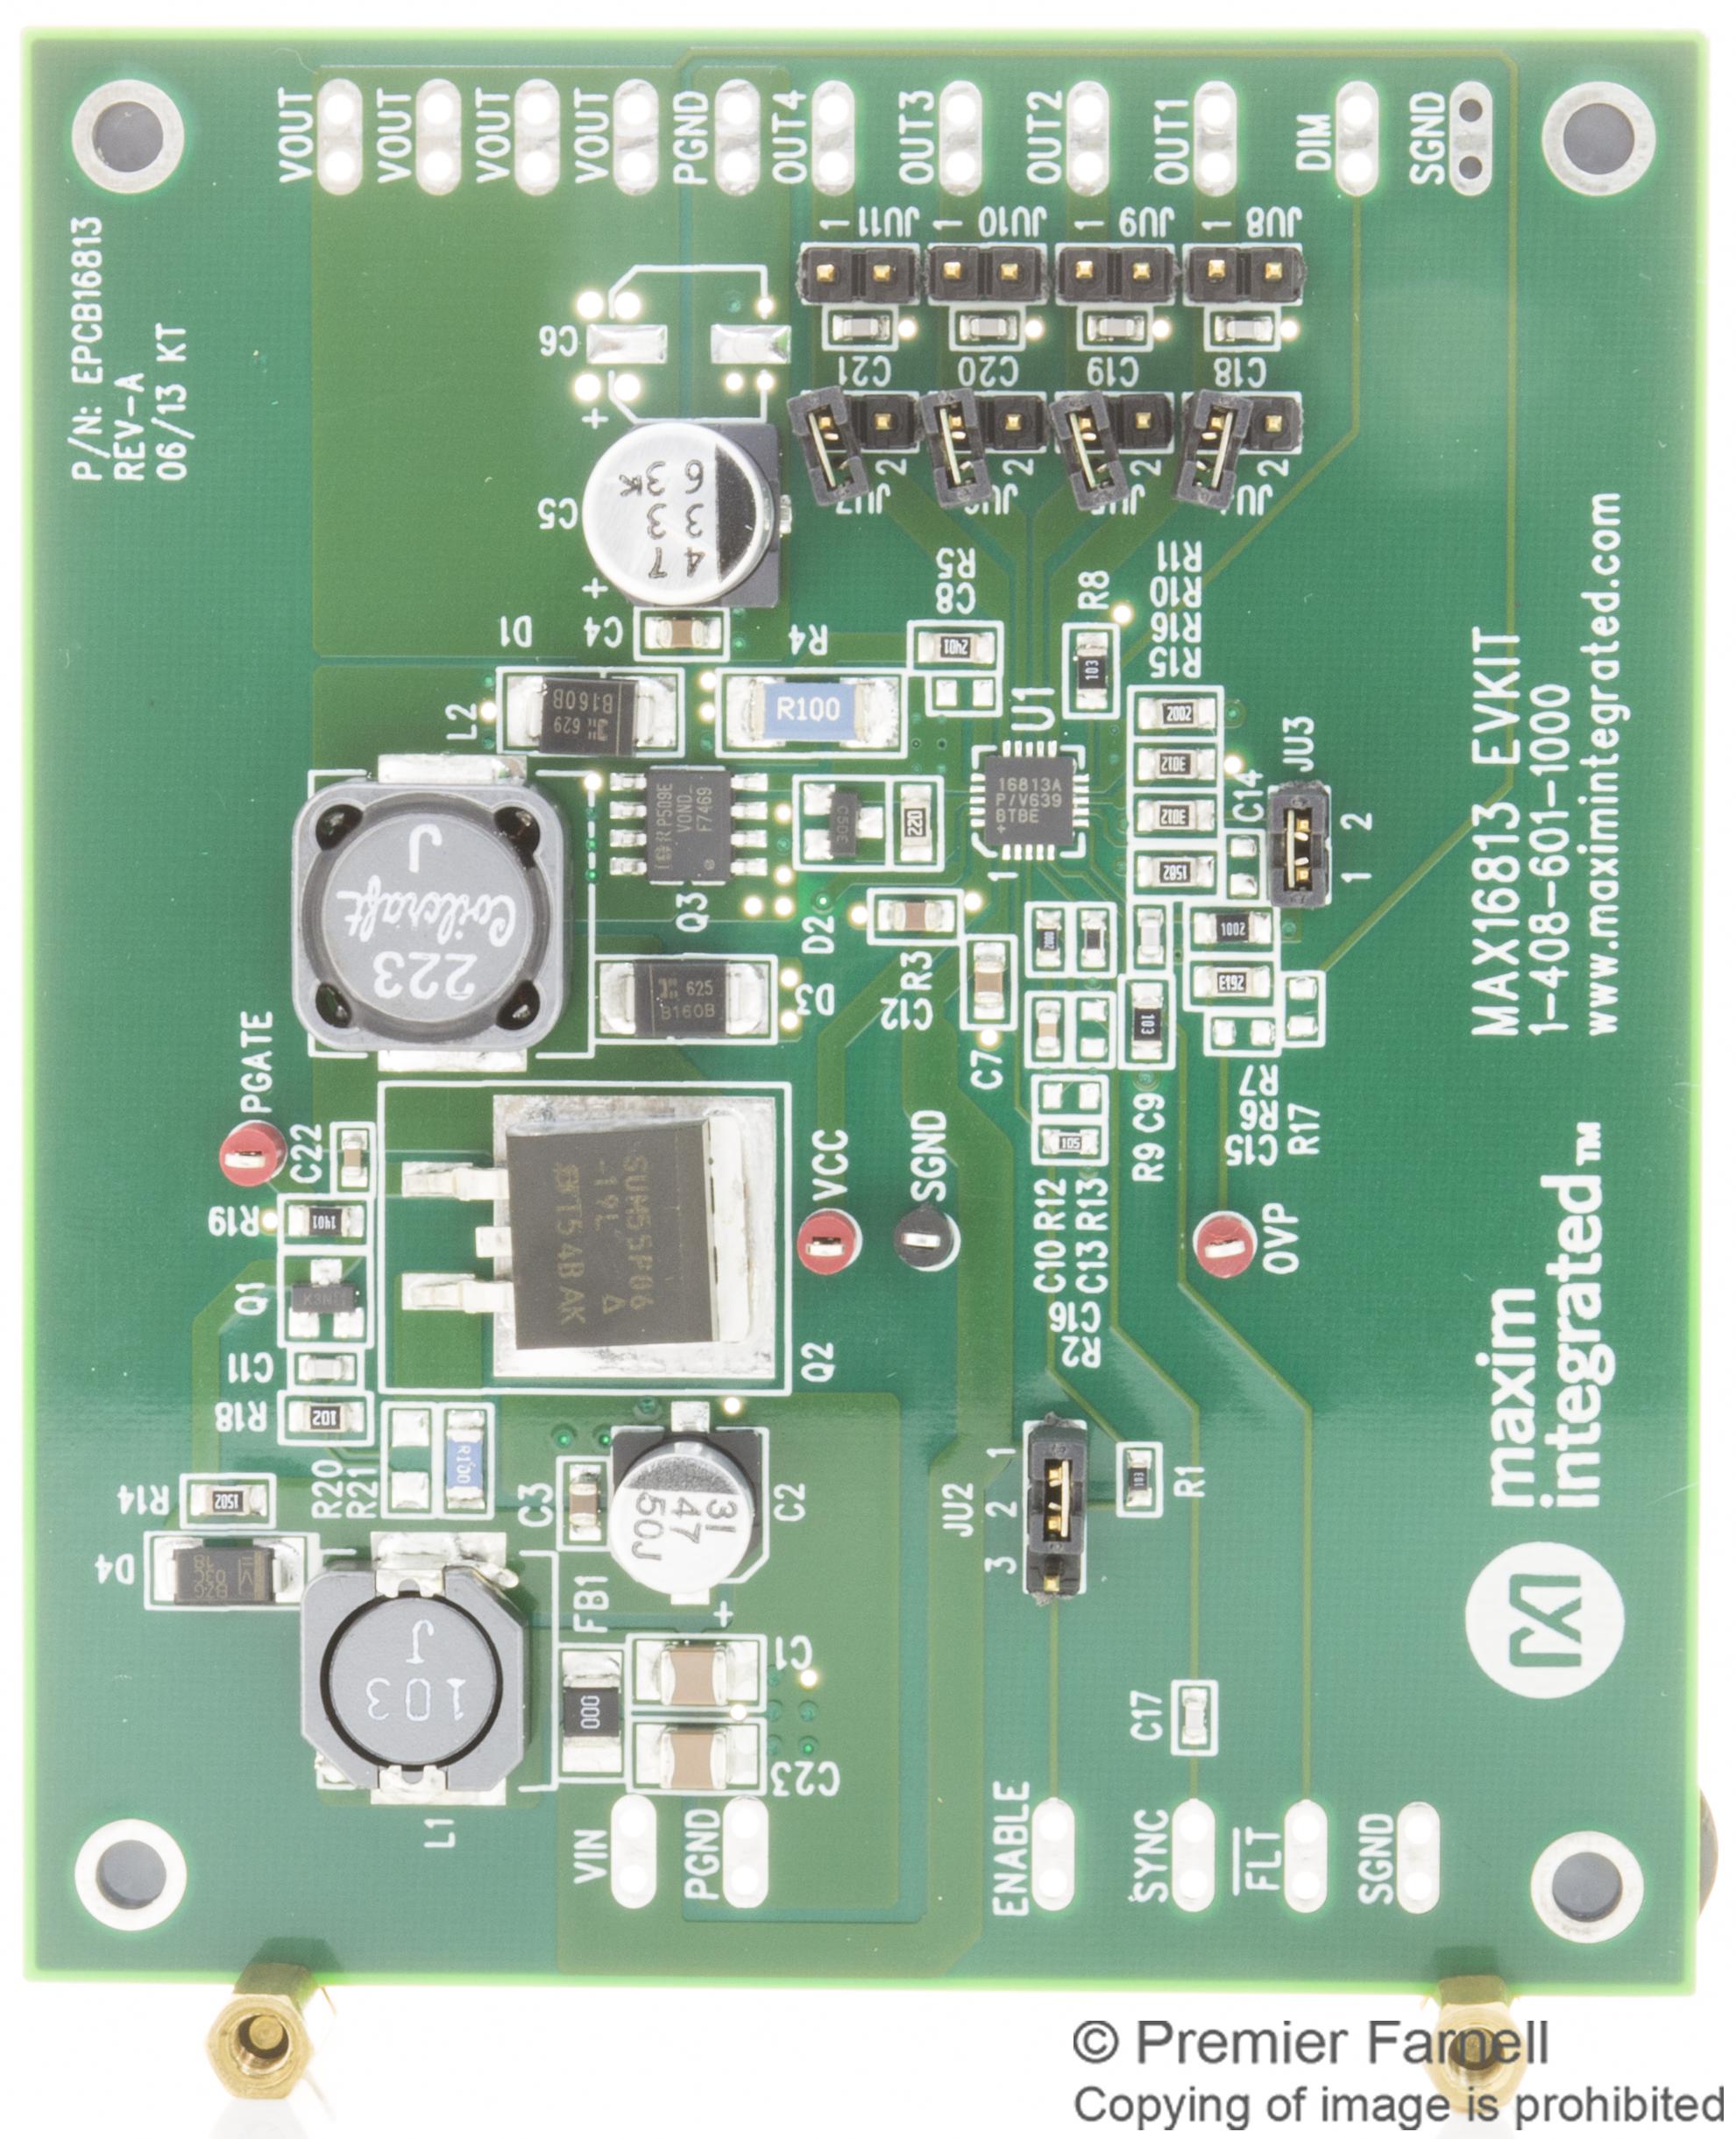 MAX16813EVKIT# EVAL BRD, 4CH,HIGH-BRIGHTNESS LED DRIVER MAXIM INTEGRATED / ANALOG DEVICES